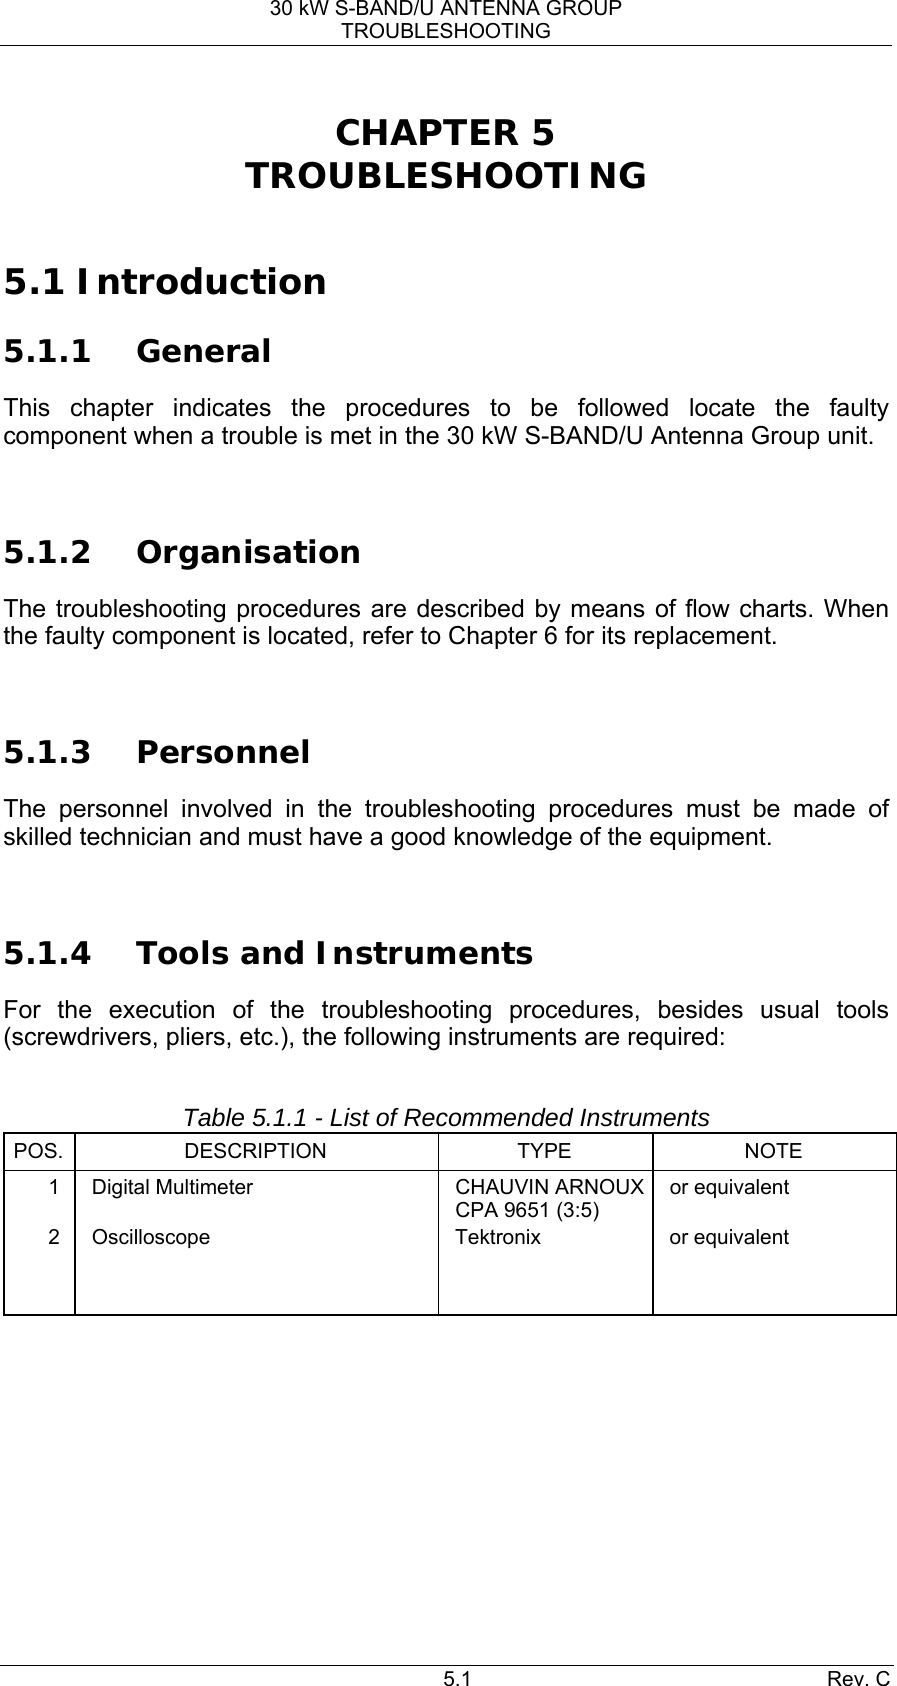 30 kW S-BAND/U ANTENNA GROUP TROUBLESHOOTING 5.1 Rev. C CHAPTER 5 TROUBLESHOOTING  5.1 Introduction 5.1.1 General This chapter indicates the procedures to be followed locate the faulty component when a trouble is met in the 30 kW S-BAND/U Antenna Group unit.  5.1.2 Organisation The troubleshooting procedures are described by means of flow charts. When the faulty component is located, refer to Chapter 6 for its replacement.  5.1.3 Personnel The personnel involved in the troubleshooting procedures must be made of skilled technician and must have a good knowledge of the equipment.  5.1.4 Tools and Instruments For the execution of the troubleshooting procedures, besides usual tools (screwdrivers, pliers, etc.), the following instruments are required:  Table 5.1.1 - List of Recommended Instruments POS. DESCRIPTION  TYPE  NOTE 1  Digital Multimeter  CHAUVIN ARNOUX CPA 9651 (3:5) or equivalent 2 Oscilloscope  Tektronix  or equivalent                  